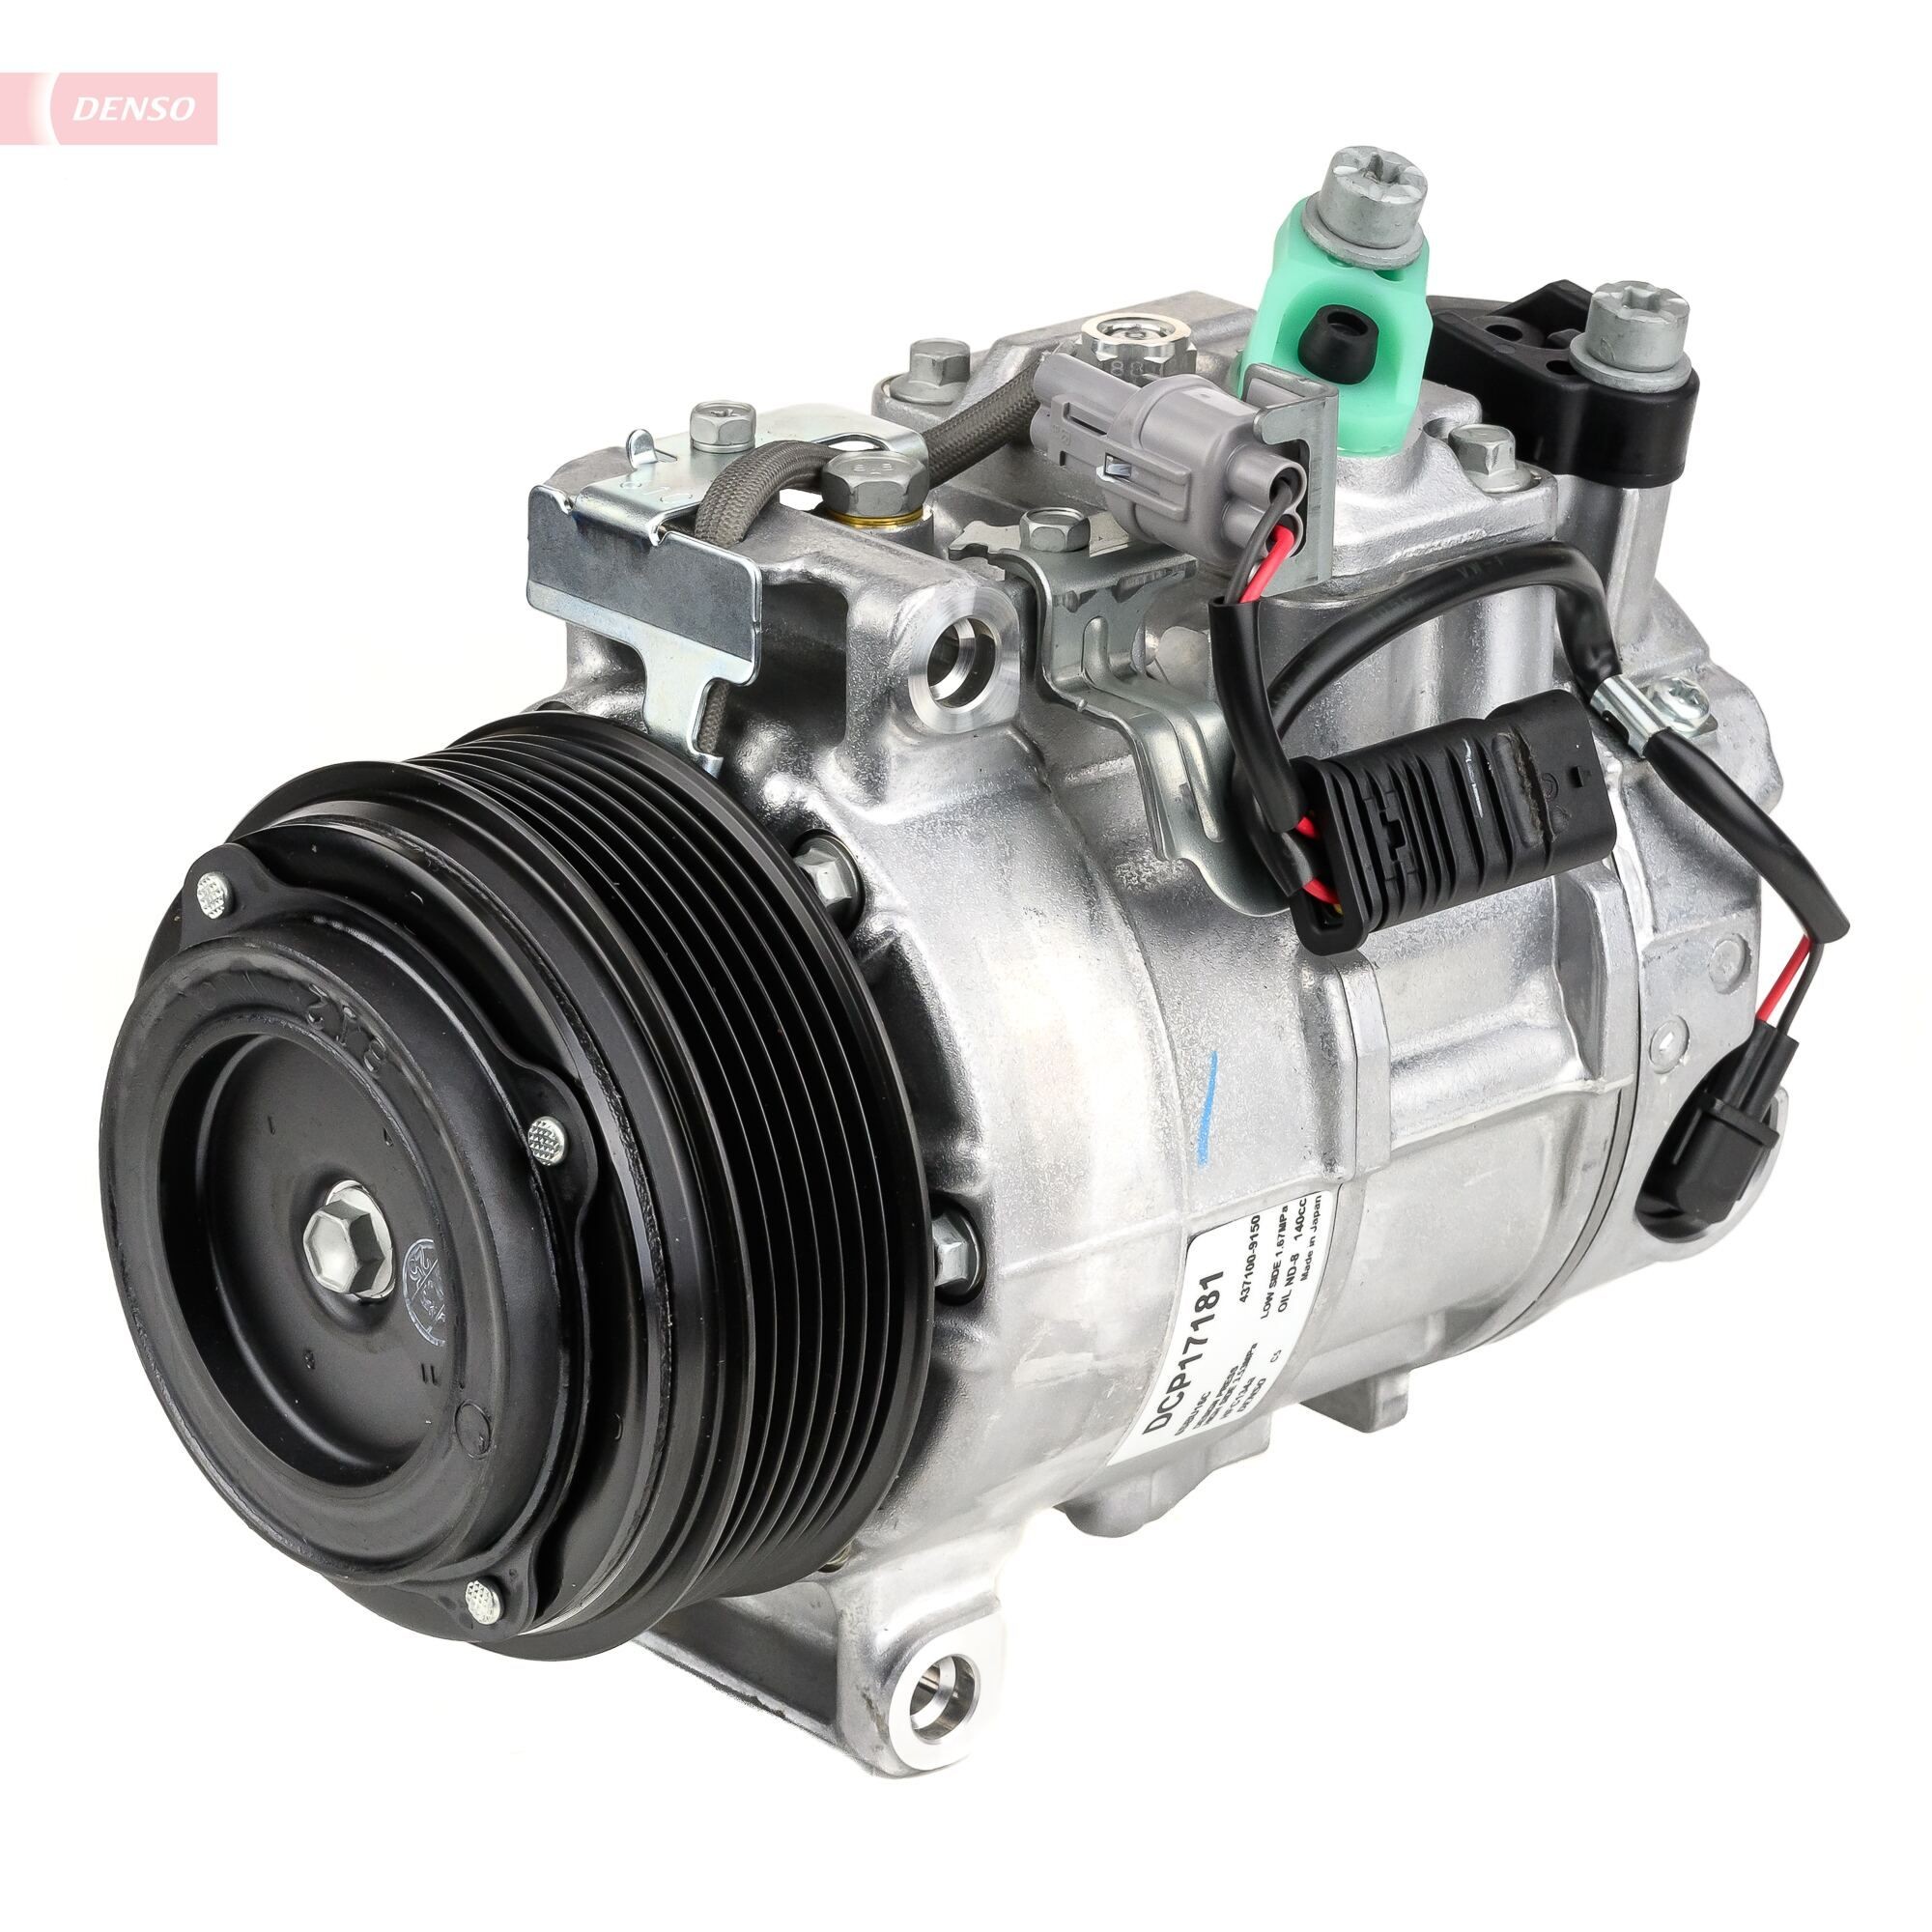 DCP17181 DENSO Air con compressor MERCEDES-BENZ 6SBU16C, 12V, PAG 46, R 134a, with magnetic clutch